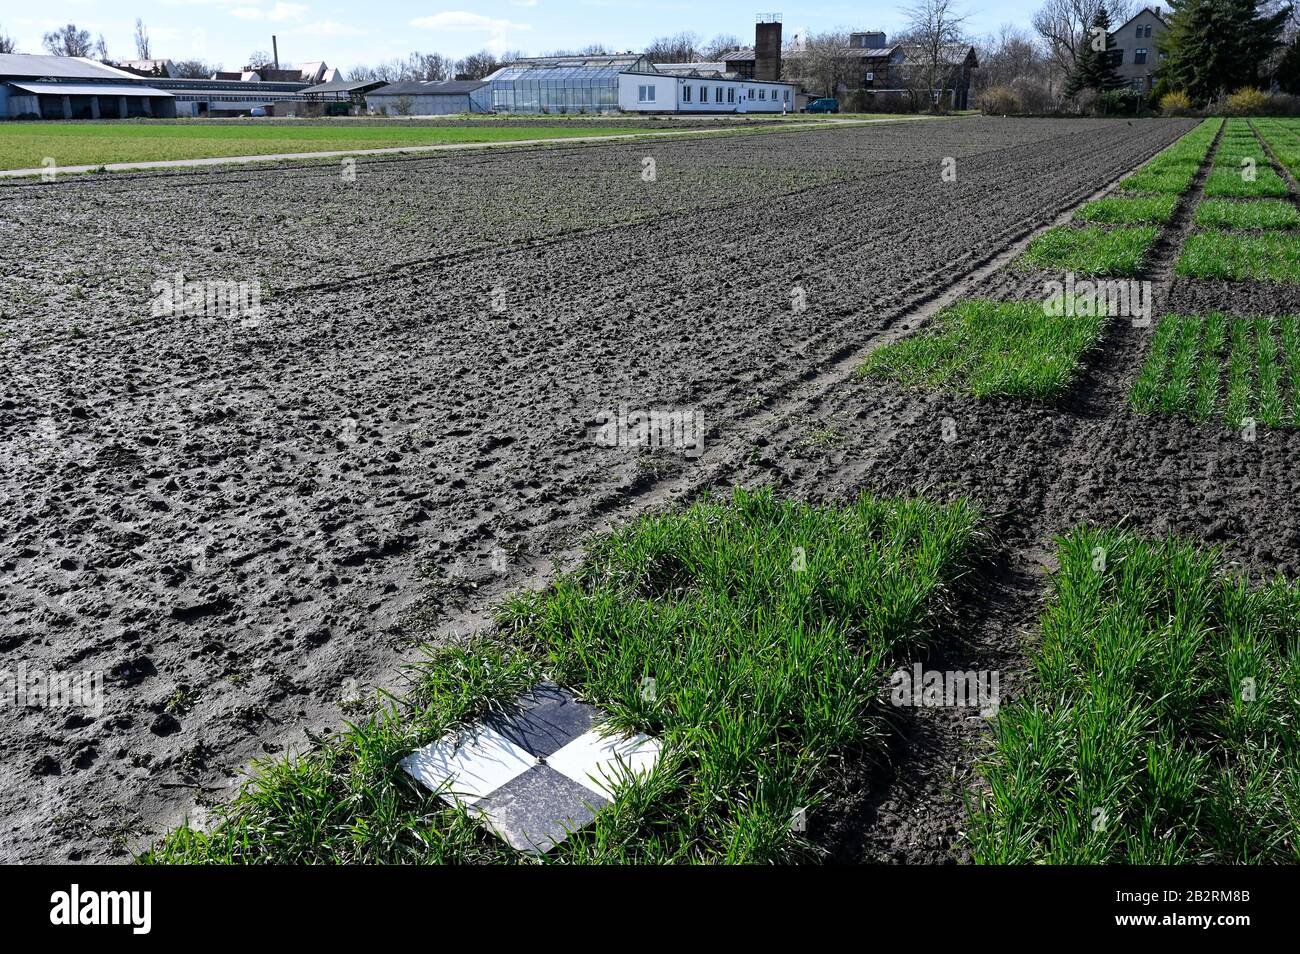 GERMANY, Halle, Martin-Luther University, department agriculture research, grain experimental farming and seed research, wheat experimental fields, marking point for drone Stock Photo